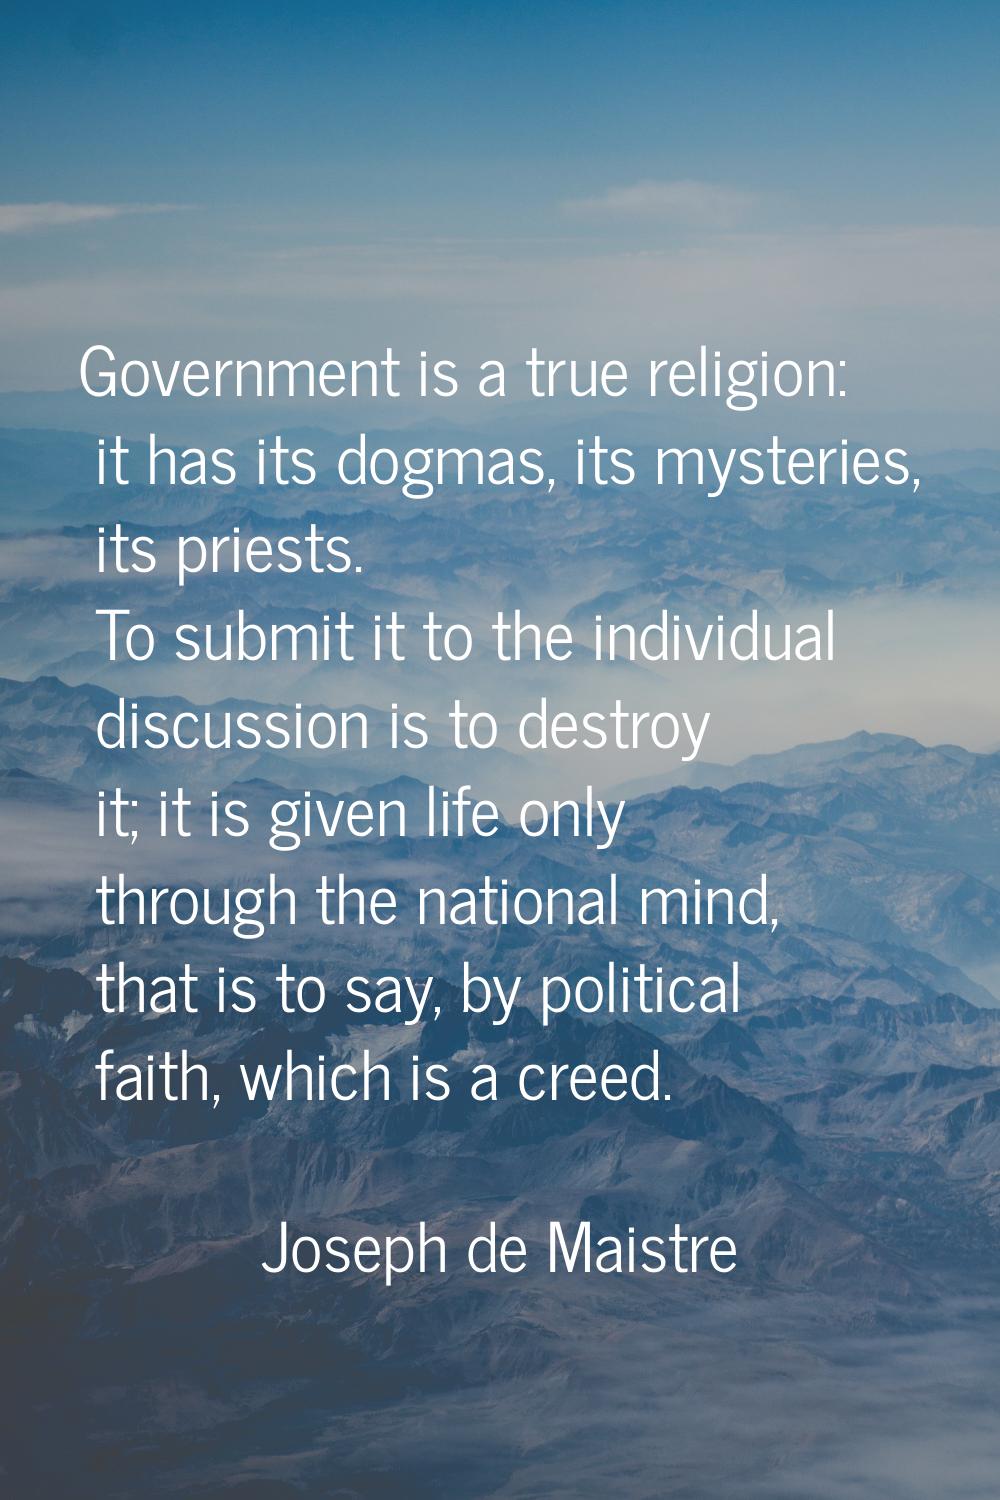 Government is a true religion: it has its dogmas, its mysteries, its priests. To submit it to the i